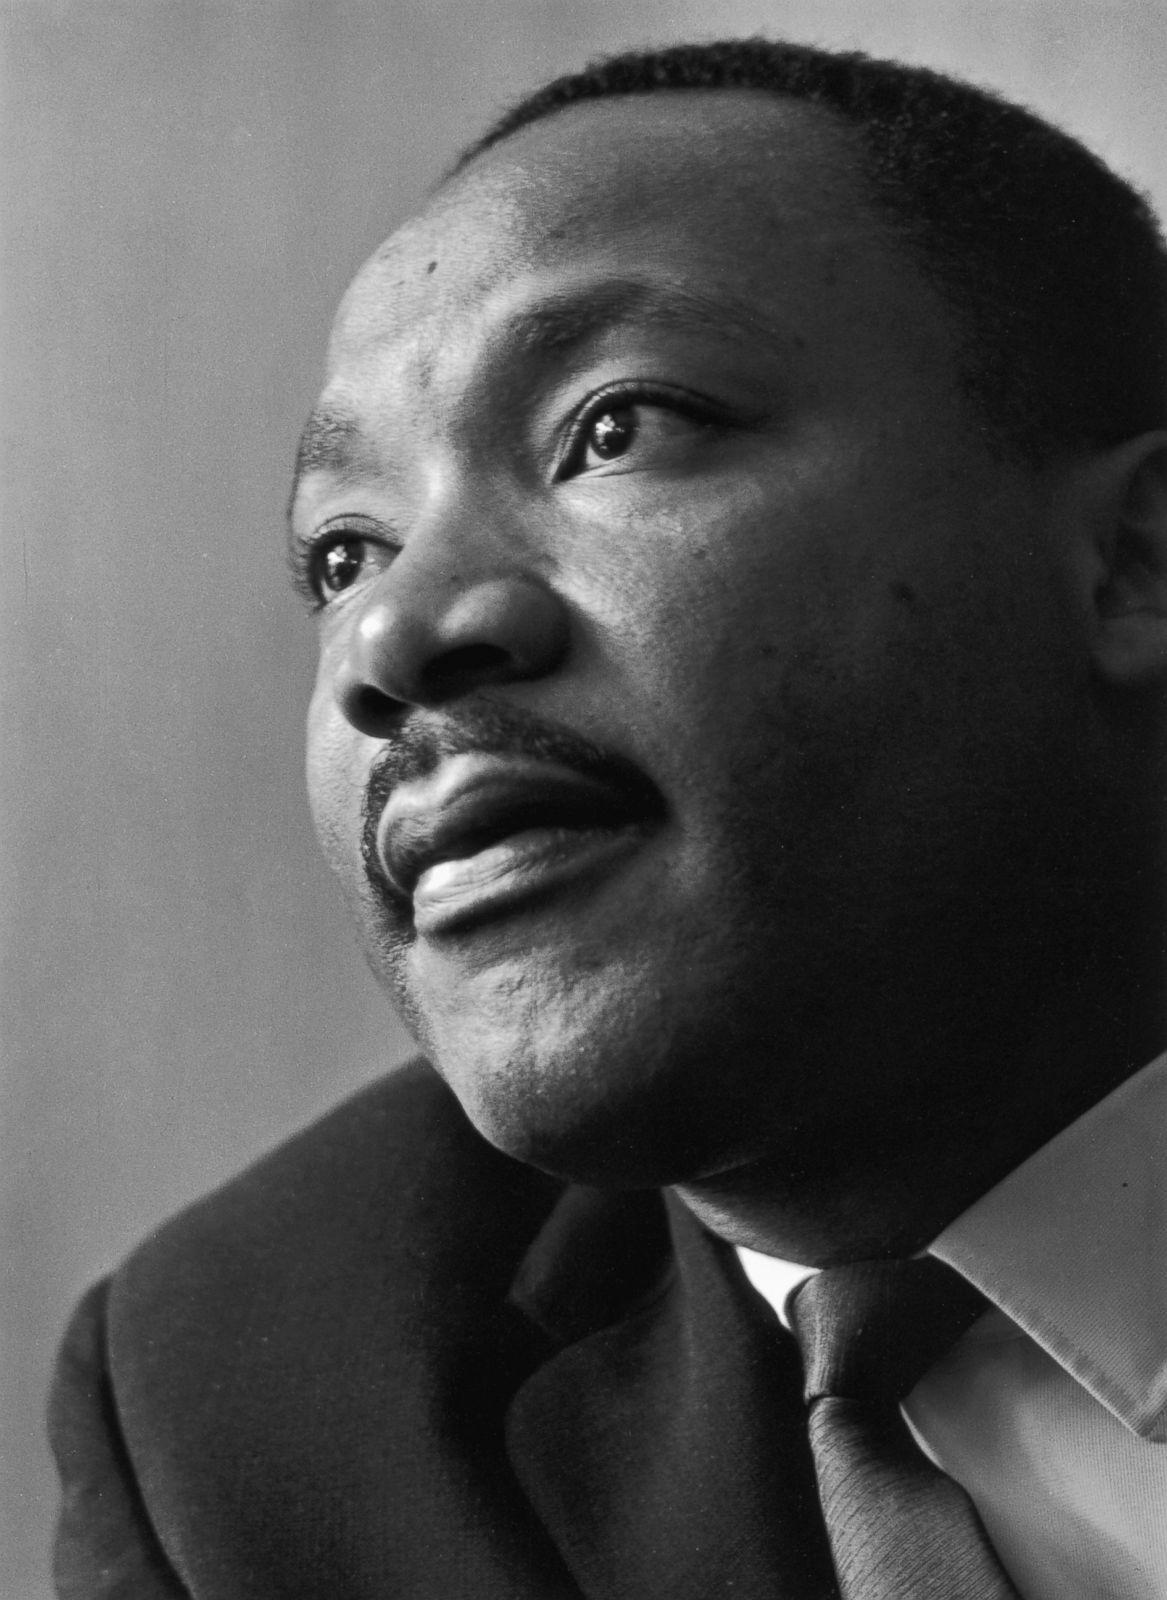 Martin Luther King Jr: A Life in Picture Photo